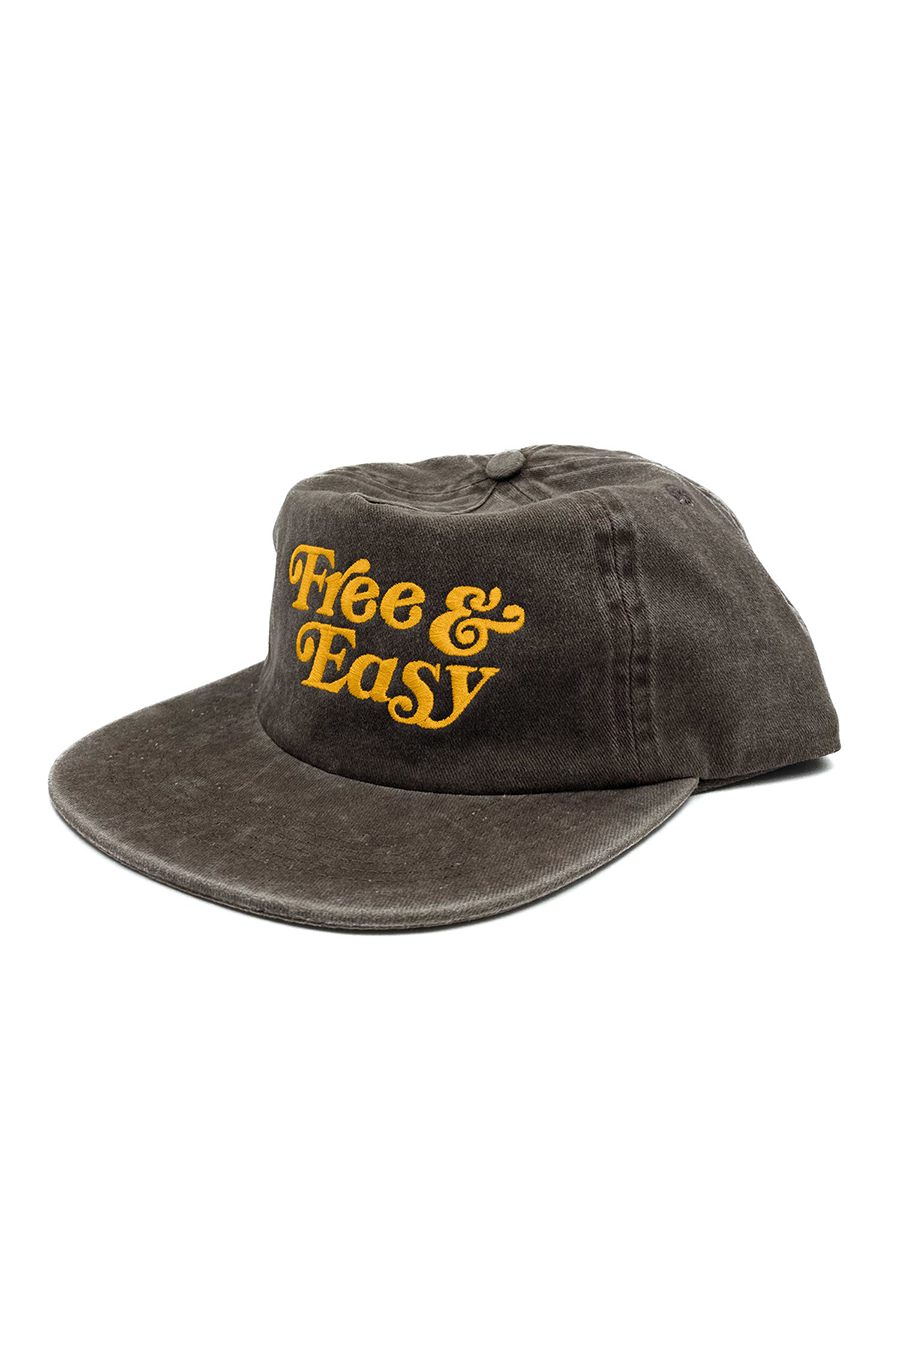 Free & Easy Washed Snapback Hat | Brown - Main Image Number 1 of 1